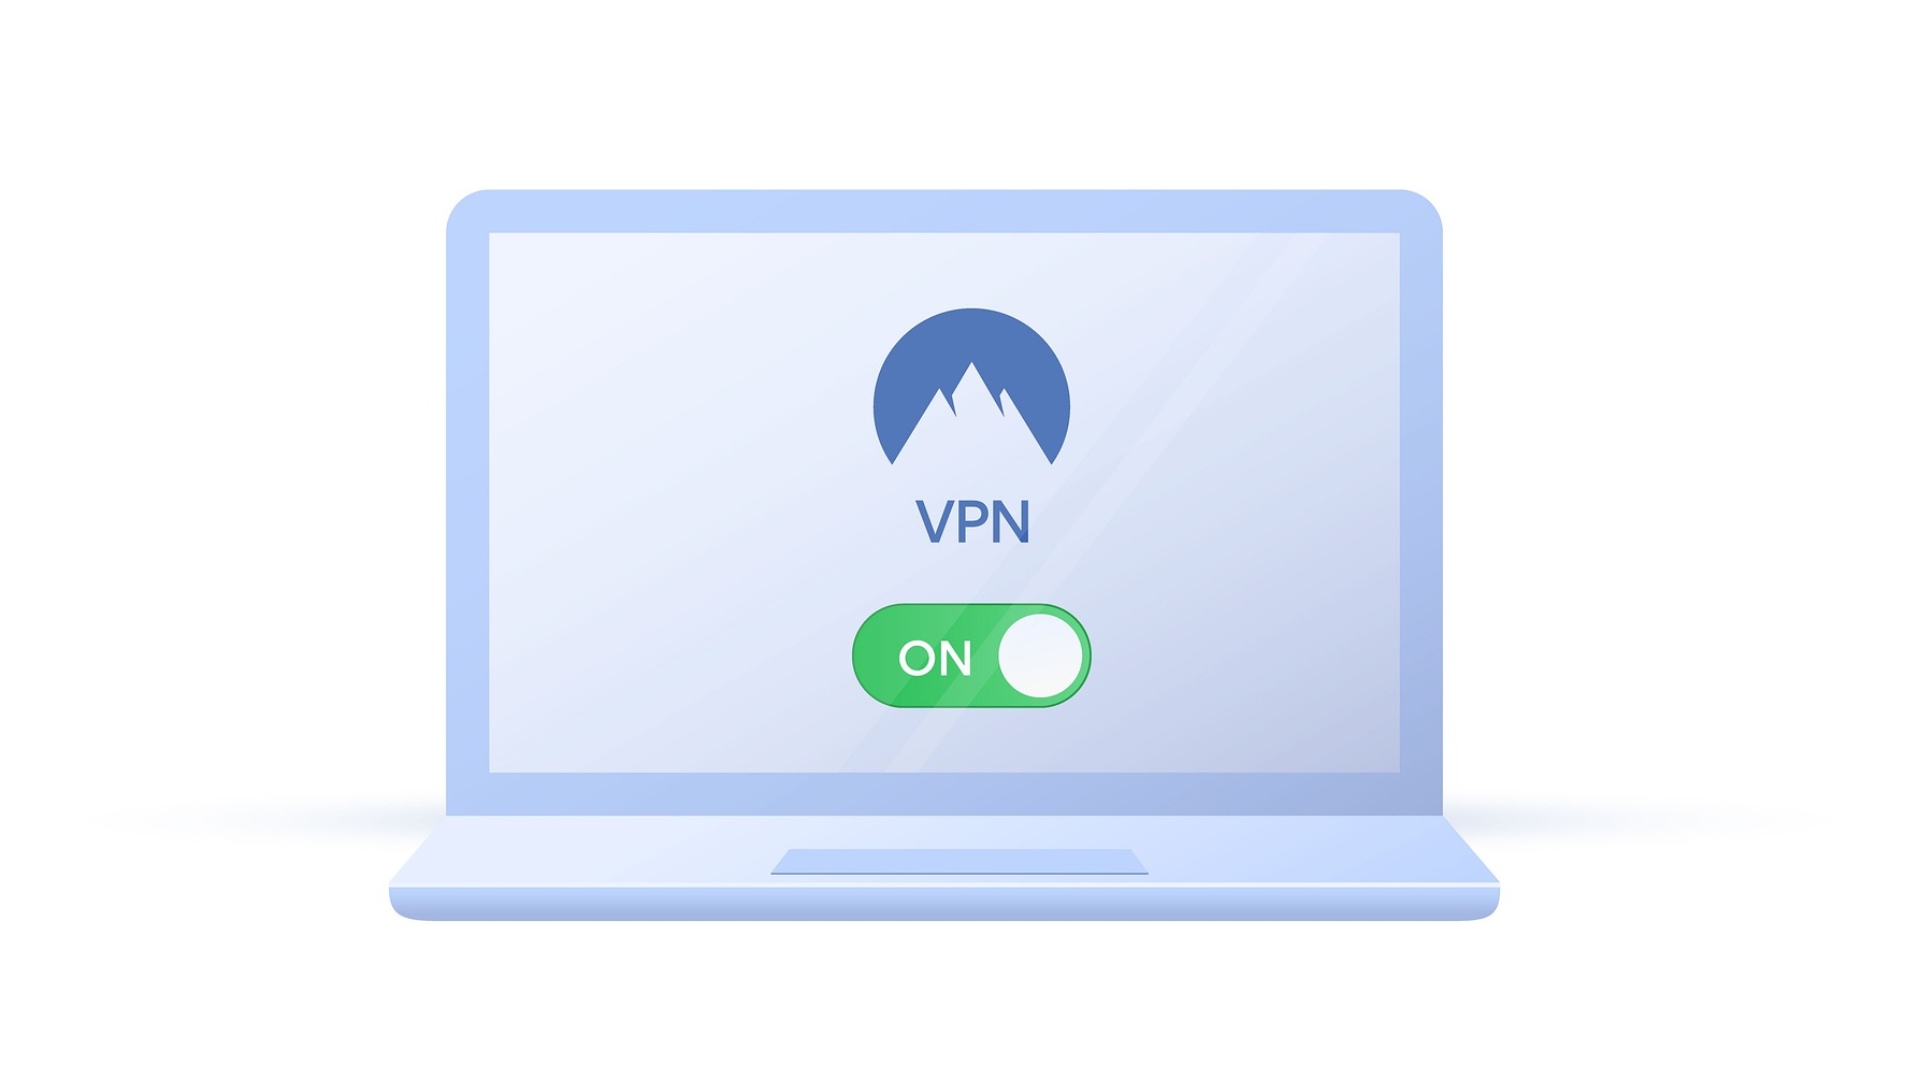 NordVPN tutorial: image shows a laptop with NordVPN switched on.